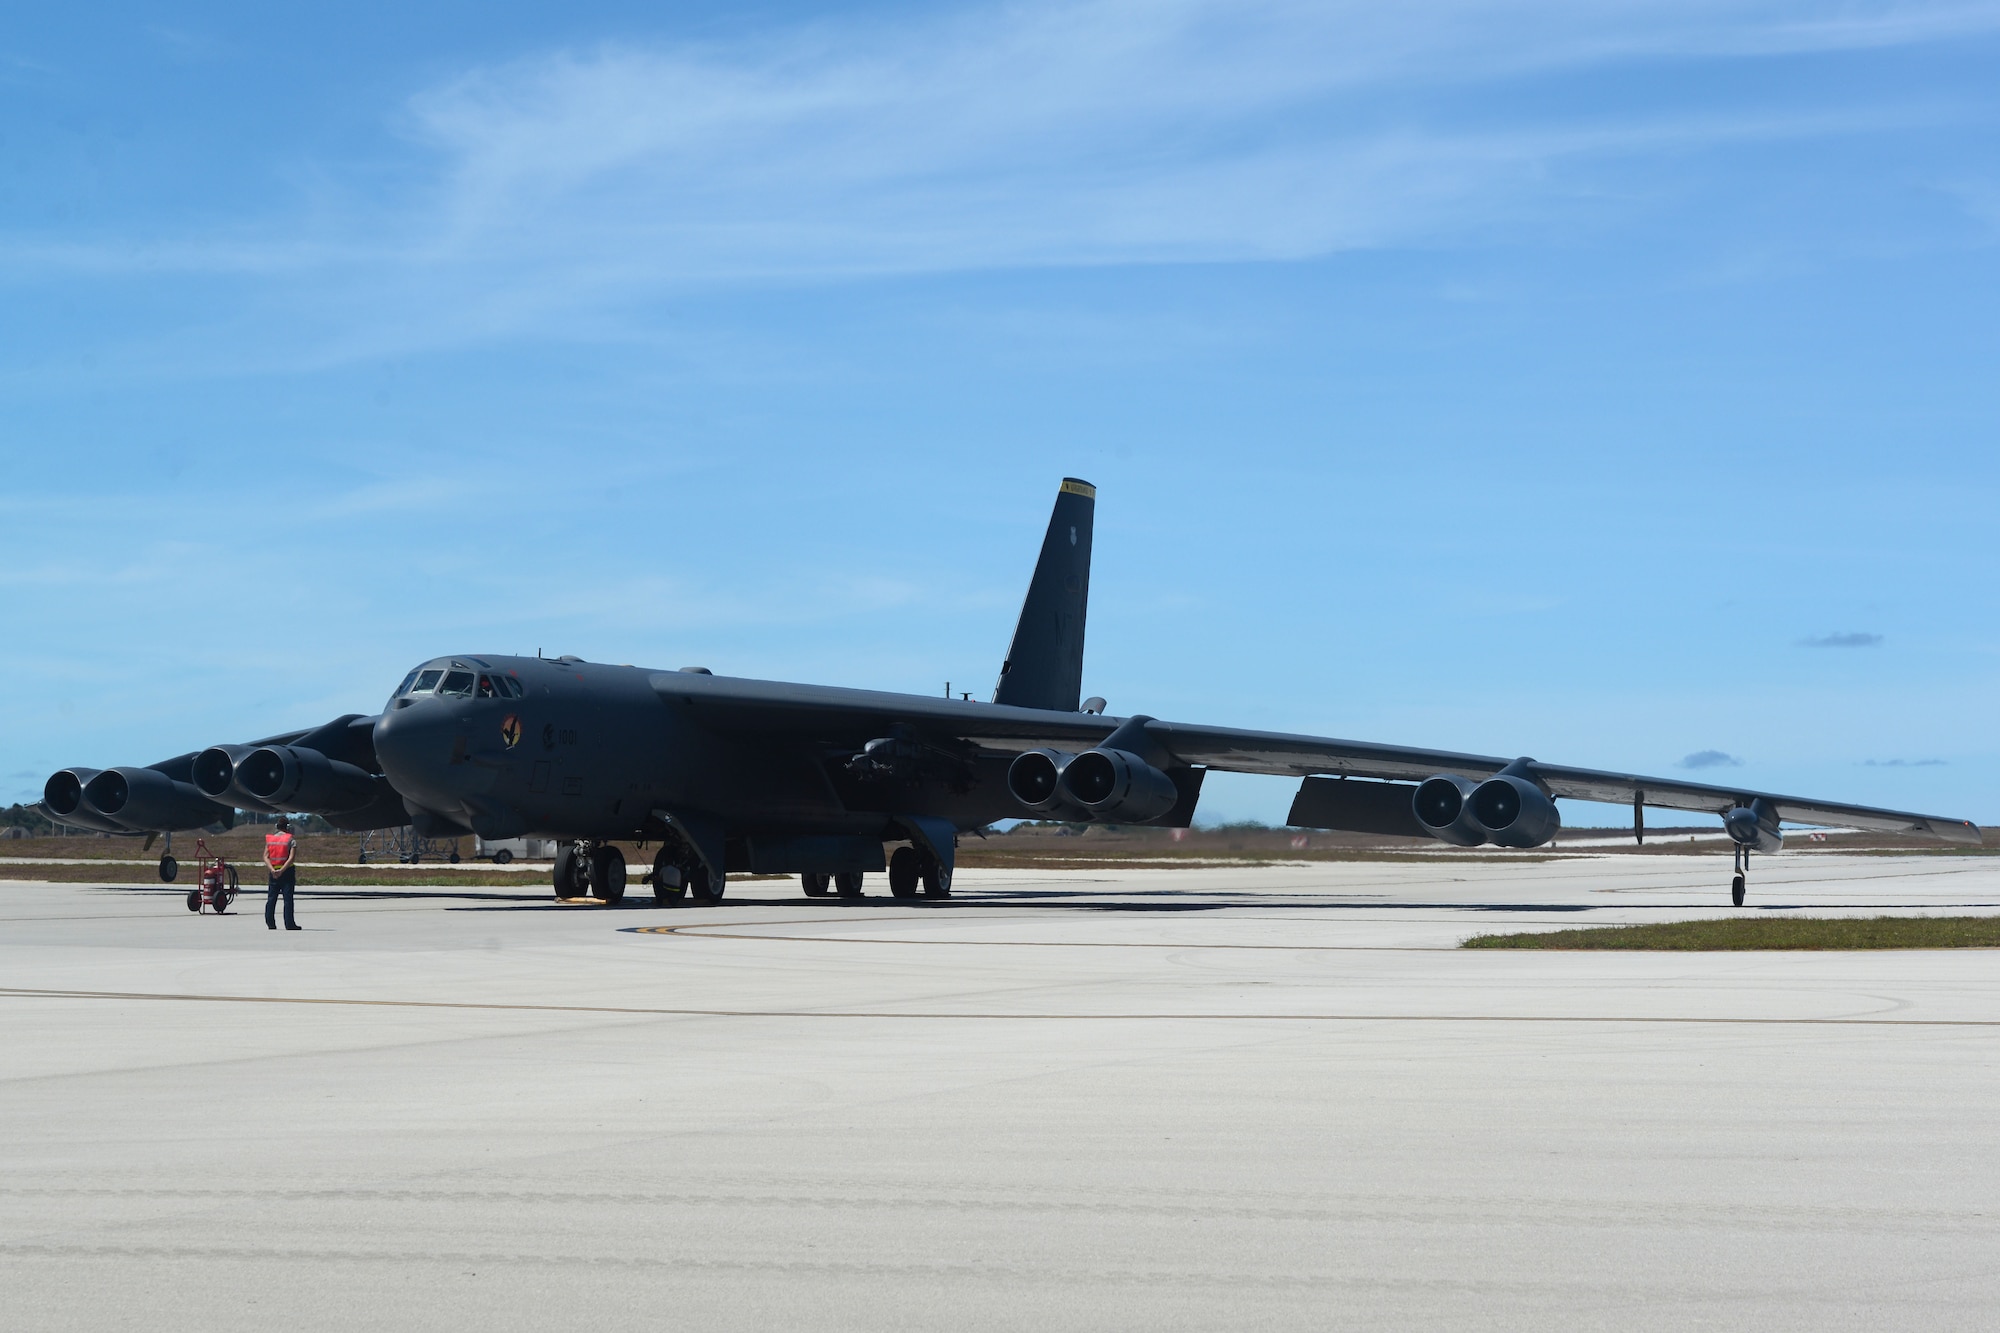 A B-52 Stratofortress from Minot Air Force Base, ND, is marshalled in June 2, 2016, at Andersen Air Force Base, Guam. The aircraft and crew are deployed in support of the Continuous Bomber Presence, which is designed to demonstrate U.S. commitment to the Indo-Asia-Pacific region and enhance regional security. (U.S. Air Force photo by Airman 1st Class Alexa Ann Henderson/Released)